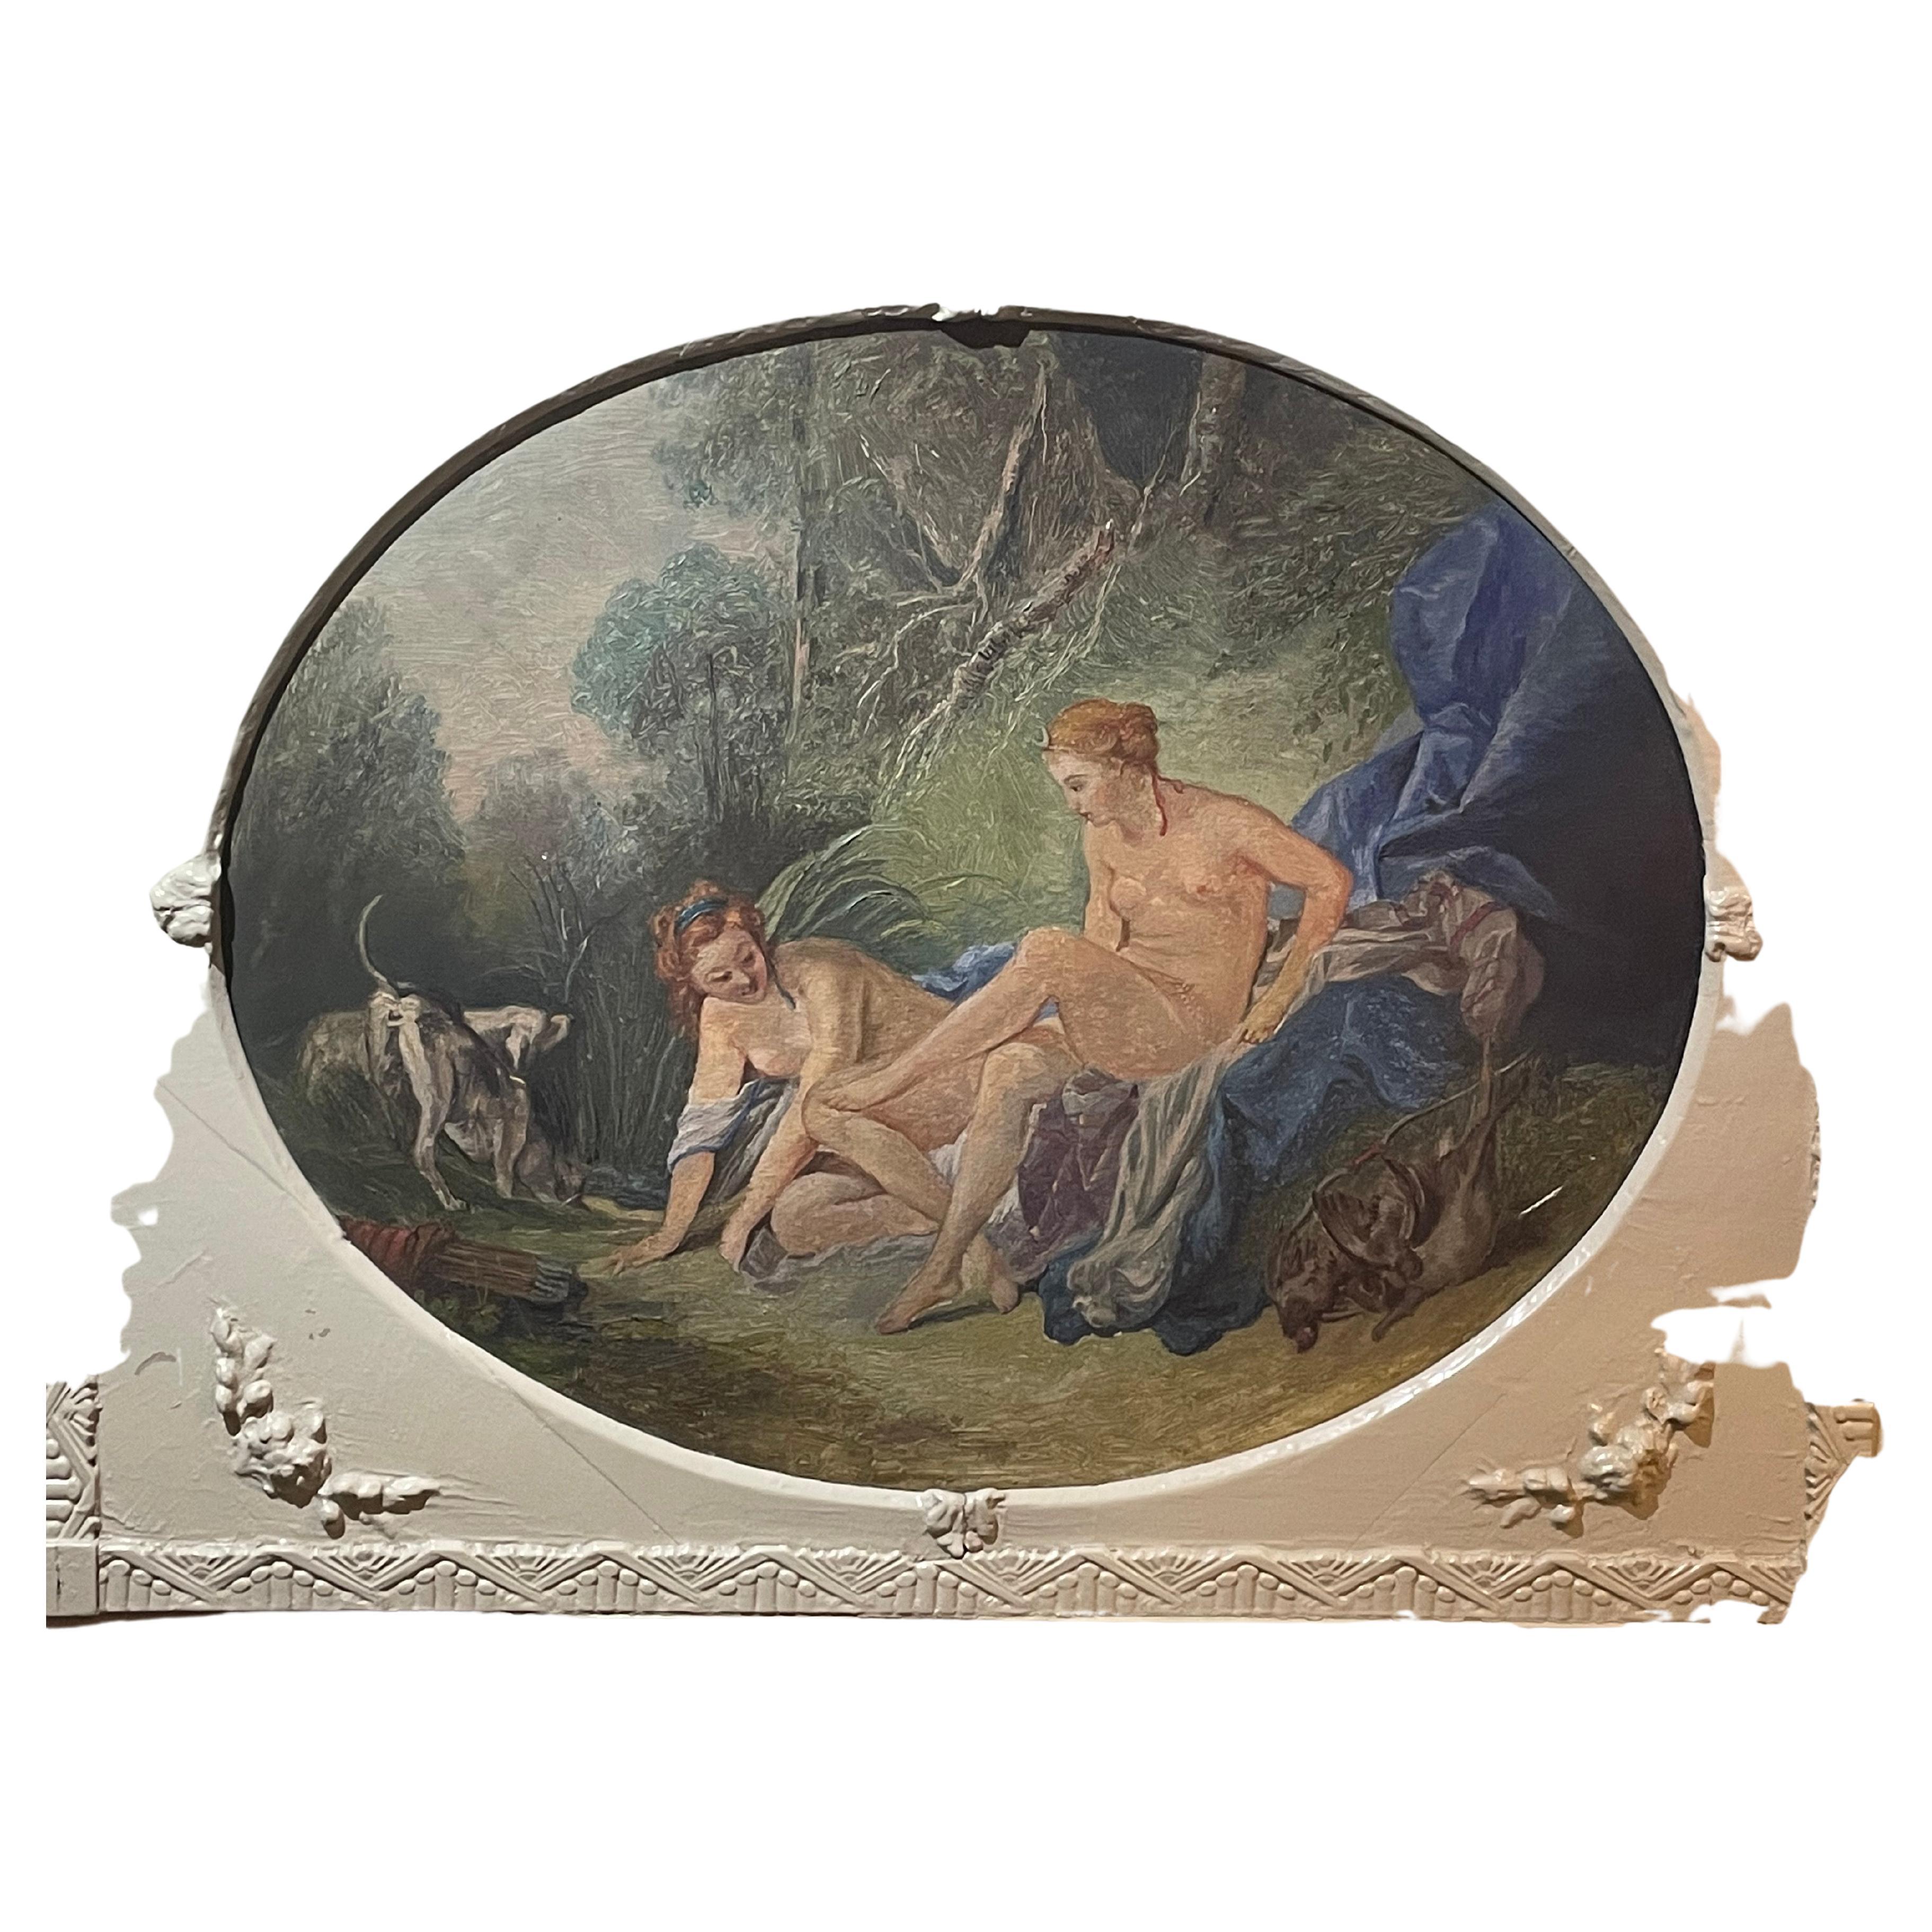 This 19th century Trumea Mantell mirror and oil painting is a finely painted story of two women nude, pond side with dogs and their catch of pheasants. The blues and greens are stunning in depth. Original mercury mirror is aged with time. The wood